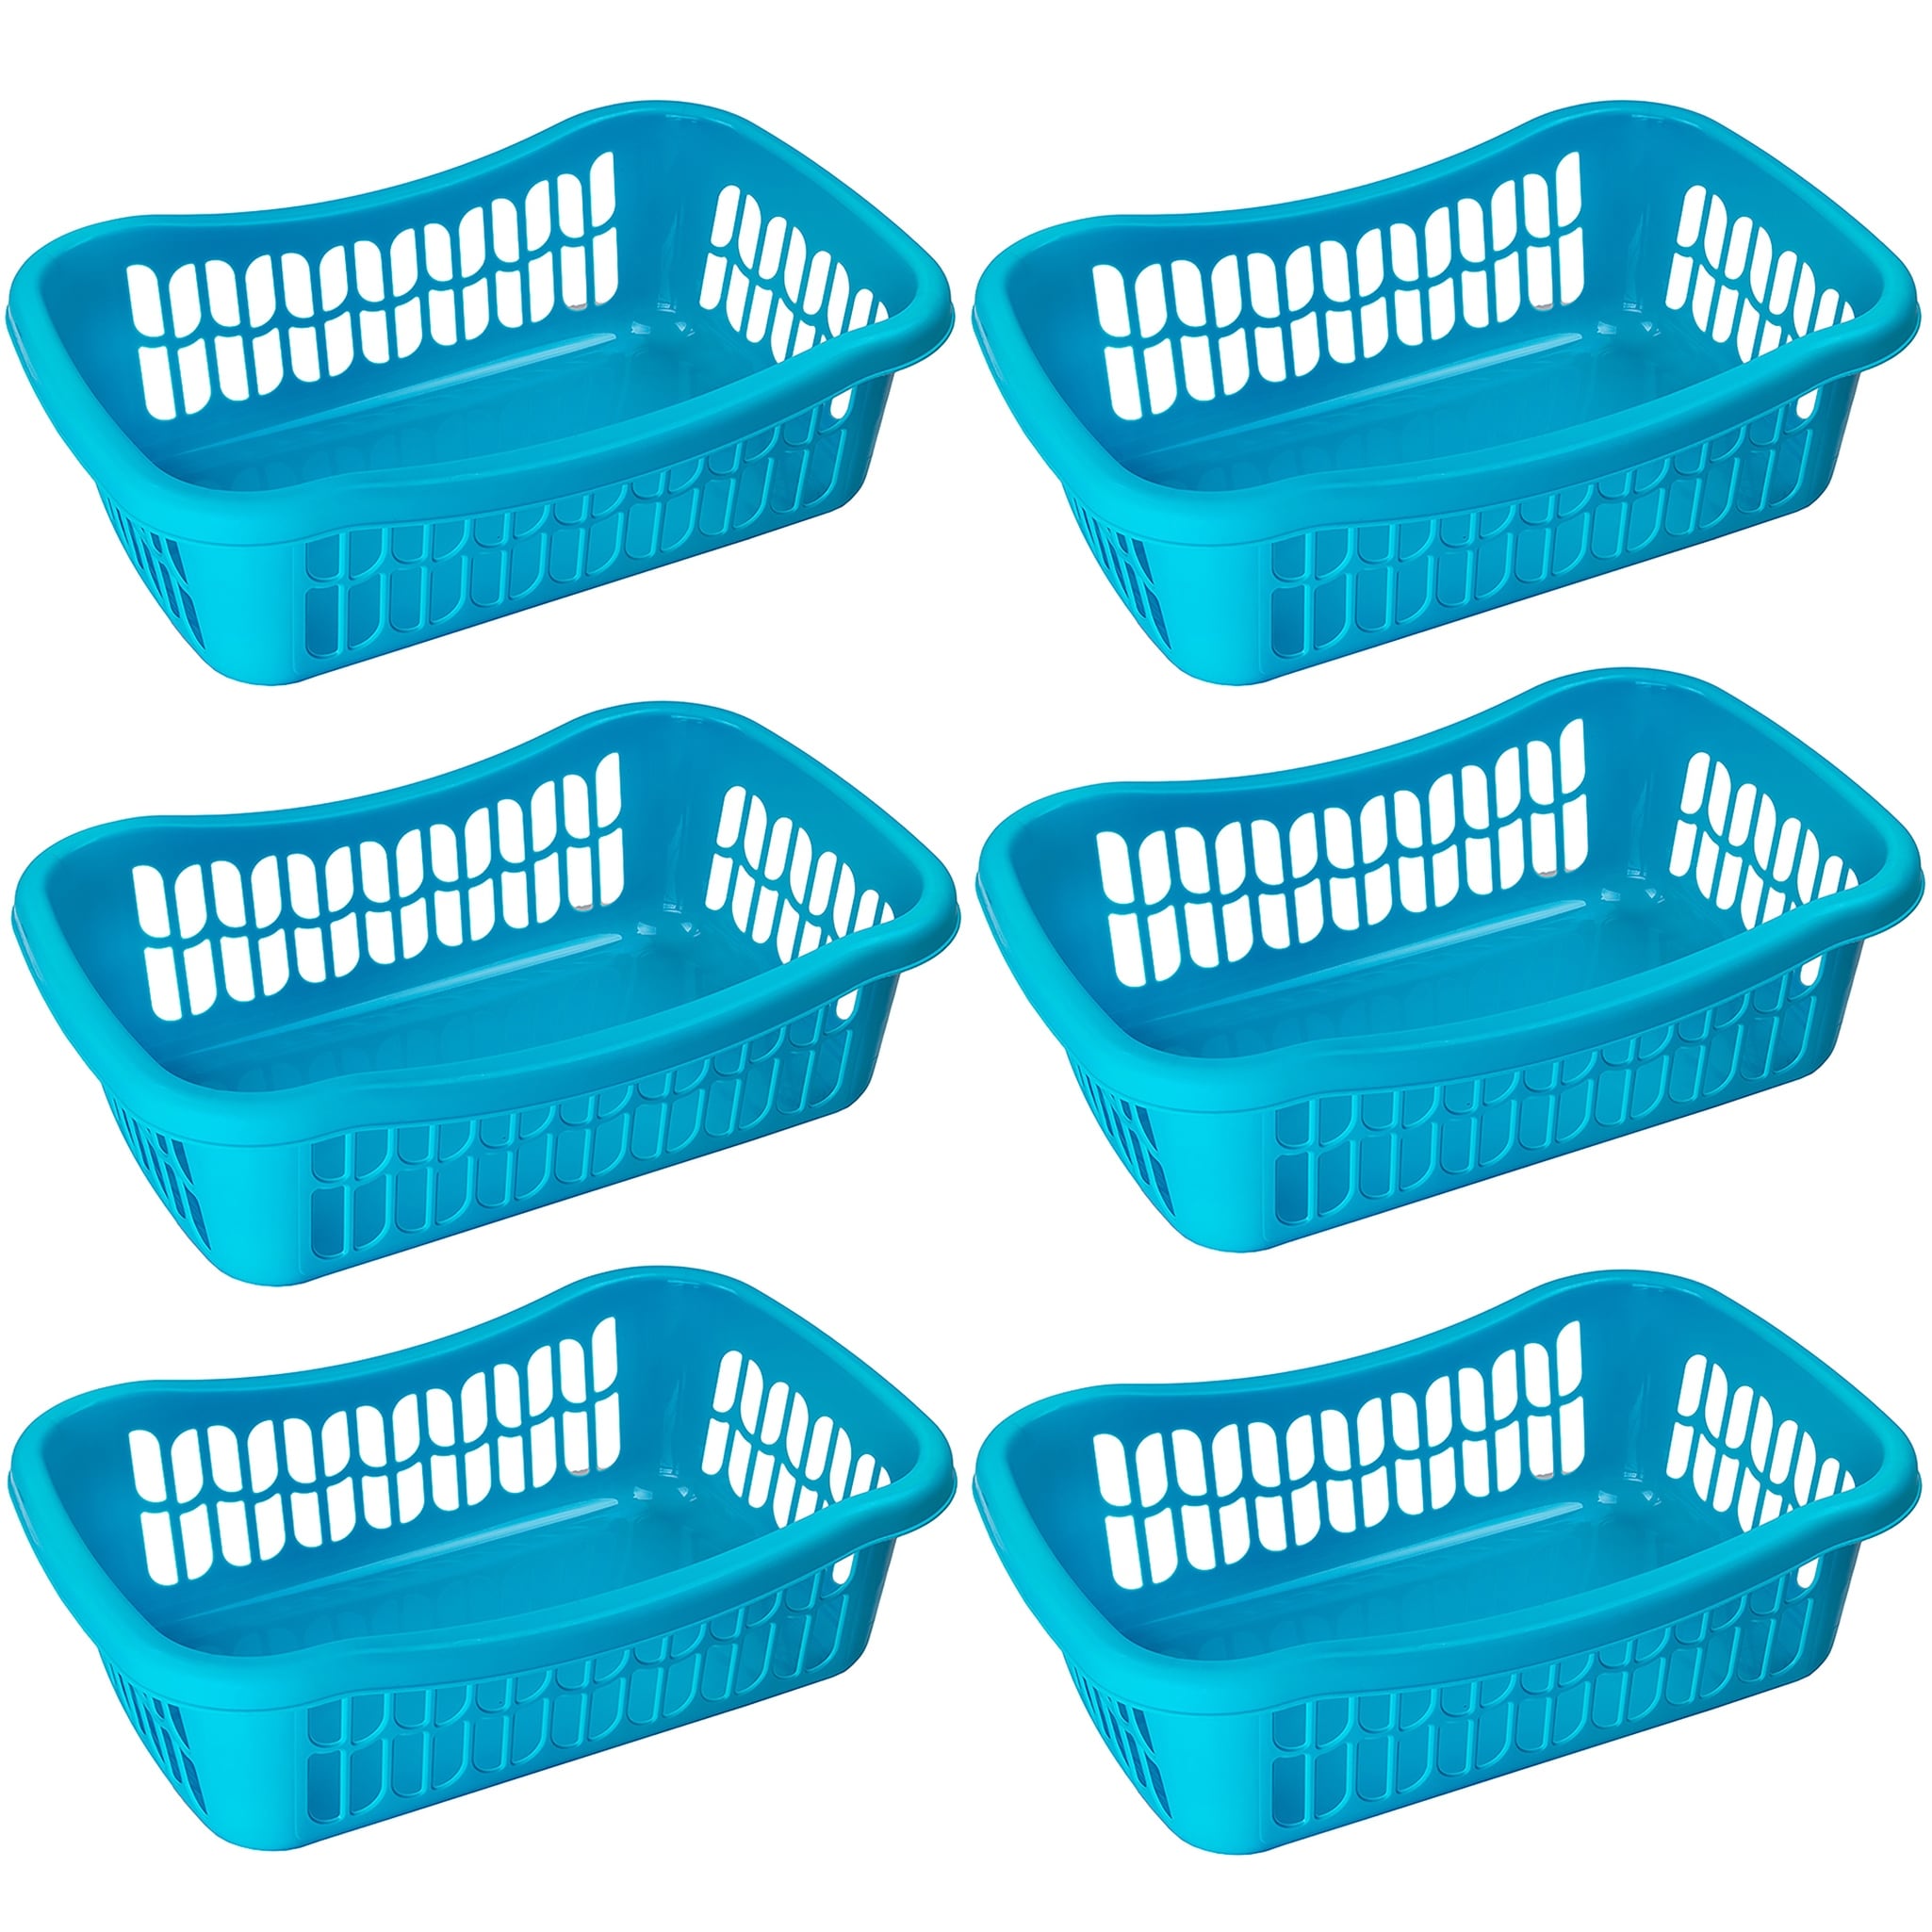 https://ak1.ostkcdn.com/images/products/is/images/direct/904c8d66175d94b5e605b118f223c2464b7342d2/Large-Plastic-Storage-Basket-for-Organizing-Kitchen-Pantry%2C-Kids-Room.jpg